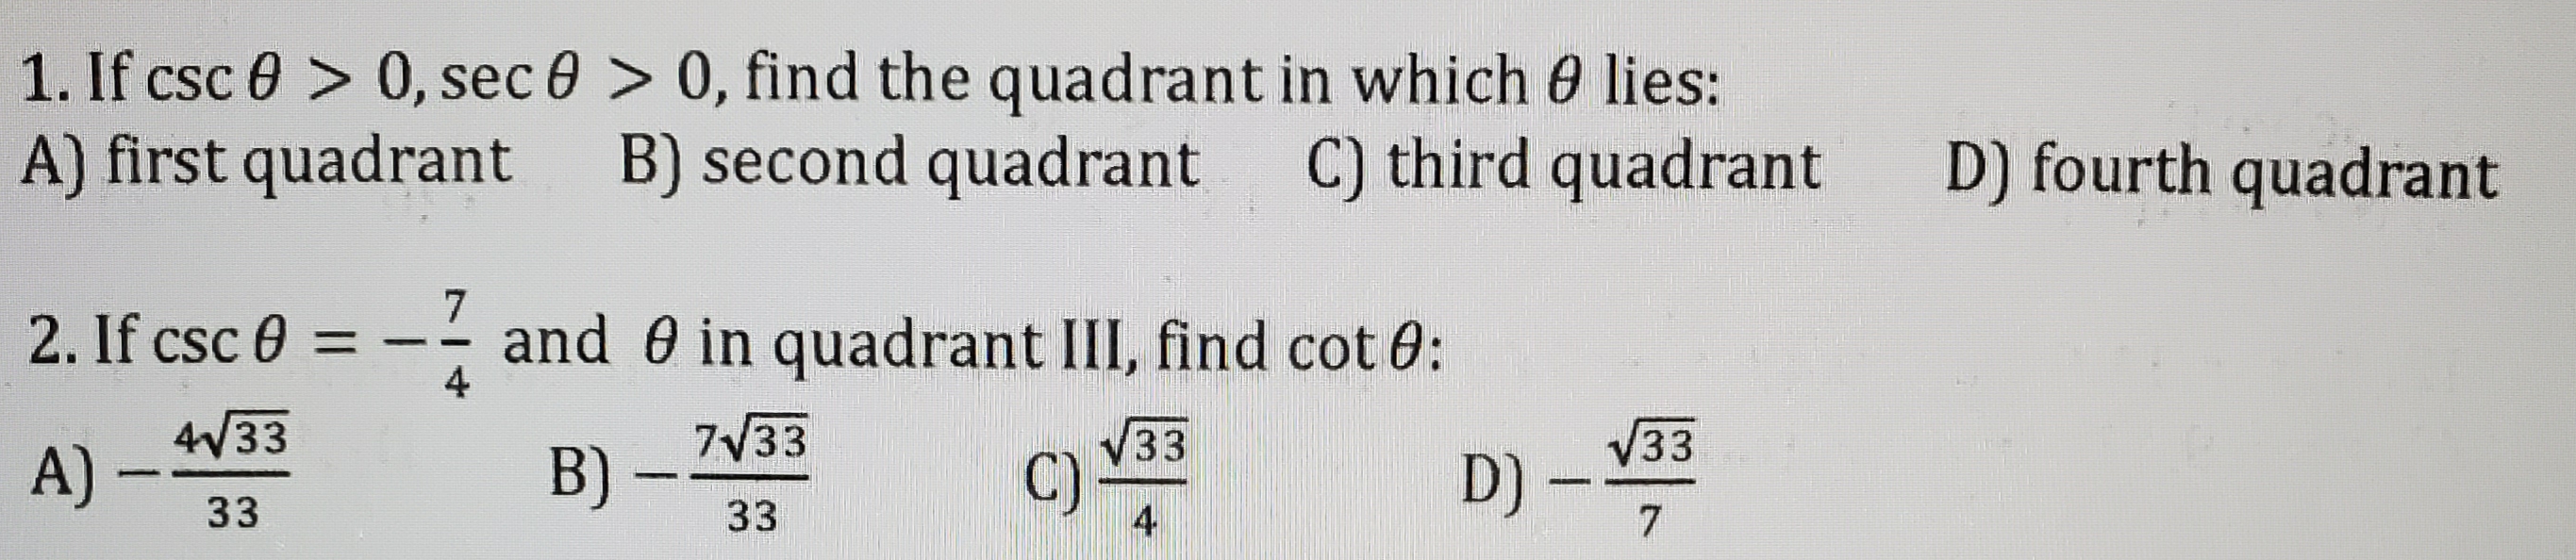 1. If csc 0 > 0, sec 0 > 0, find the quadrant in which 0 lies:
A) first quadrant B) second quadrant
C) third quadrant
D) fourth quadrant
2. If csc 0 = - - and 0 in quadrant III, find cot 0:
4
4V33
A)
7V33
33
D) -
33
B) -
33
C)
4
33
